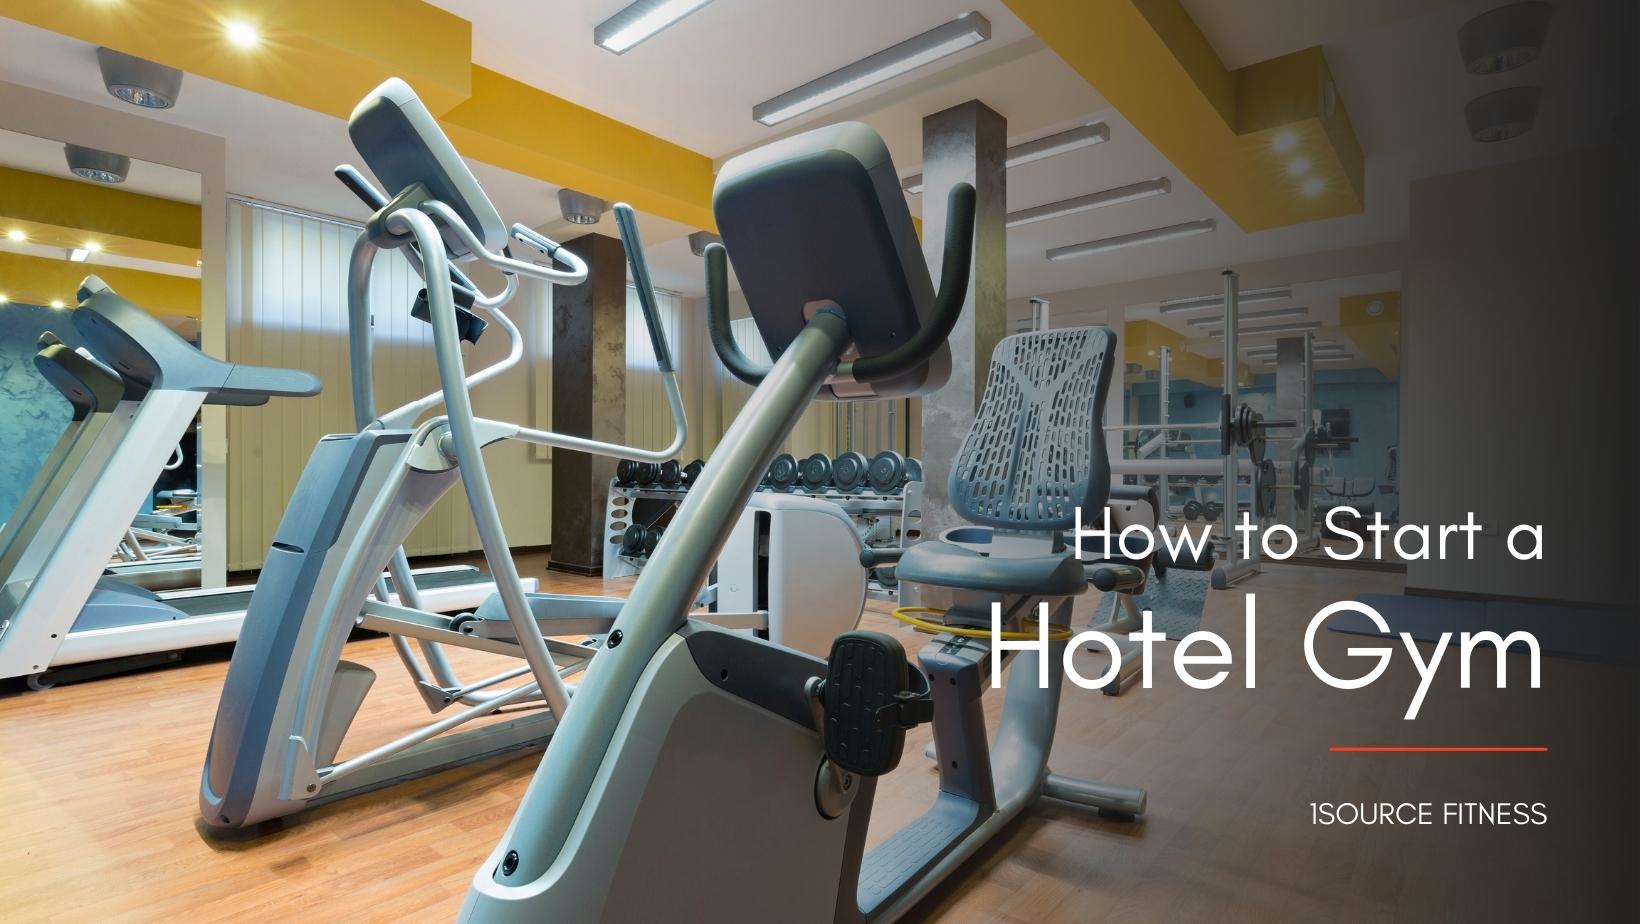 A Hotel Gym with different machines and weights. Picture saying How to Start a Hotel Gym